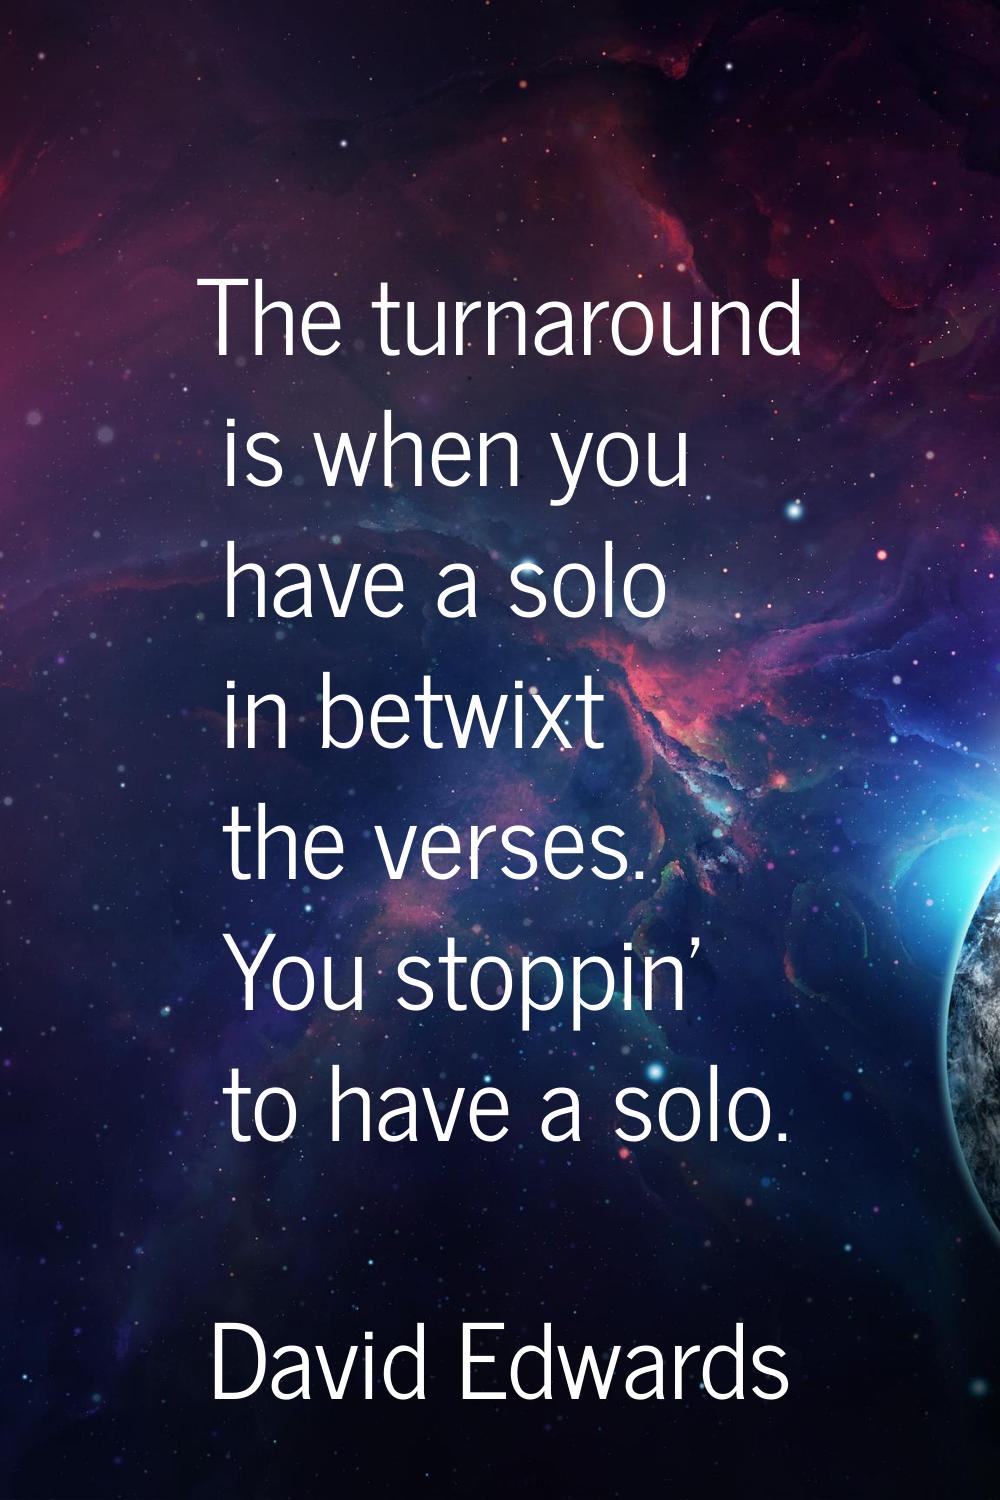 The turnaround is when you have a solo in betwixt the verses. You stoppin' to have a solo.